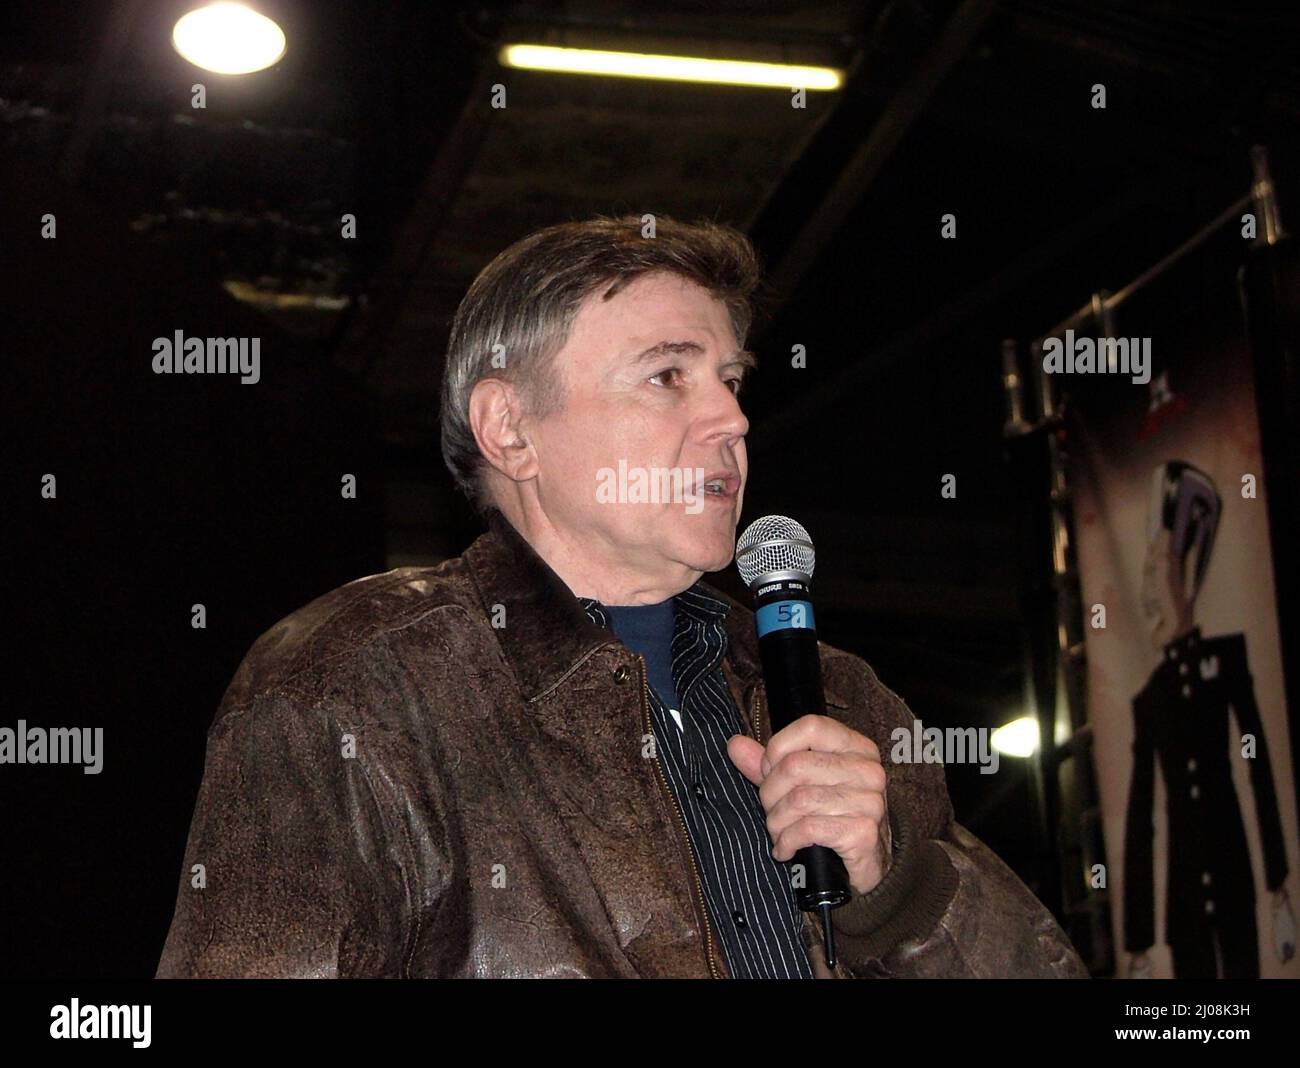 American TV & film actor and screenwriter Walter Koenig, famous for his role  as Ensign Pavel Chekov in Star Trek: The Original Series and  Babylon 5. Stock Photo